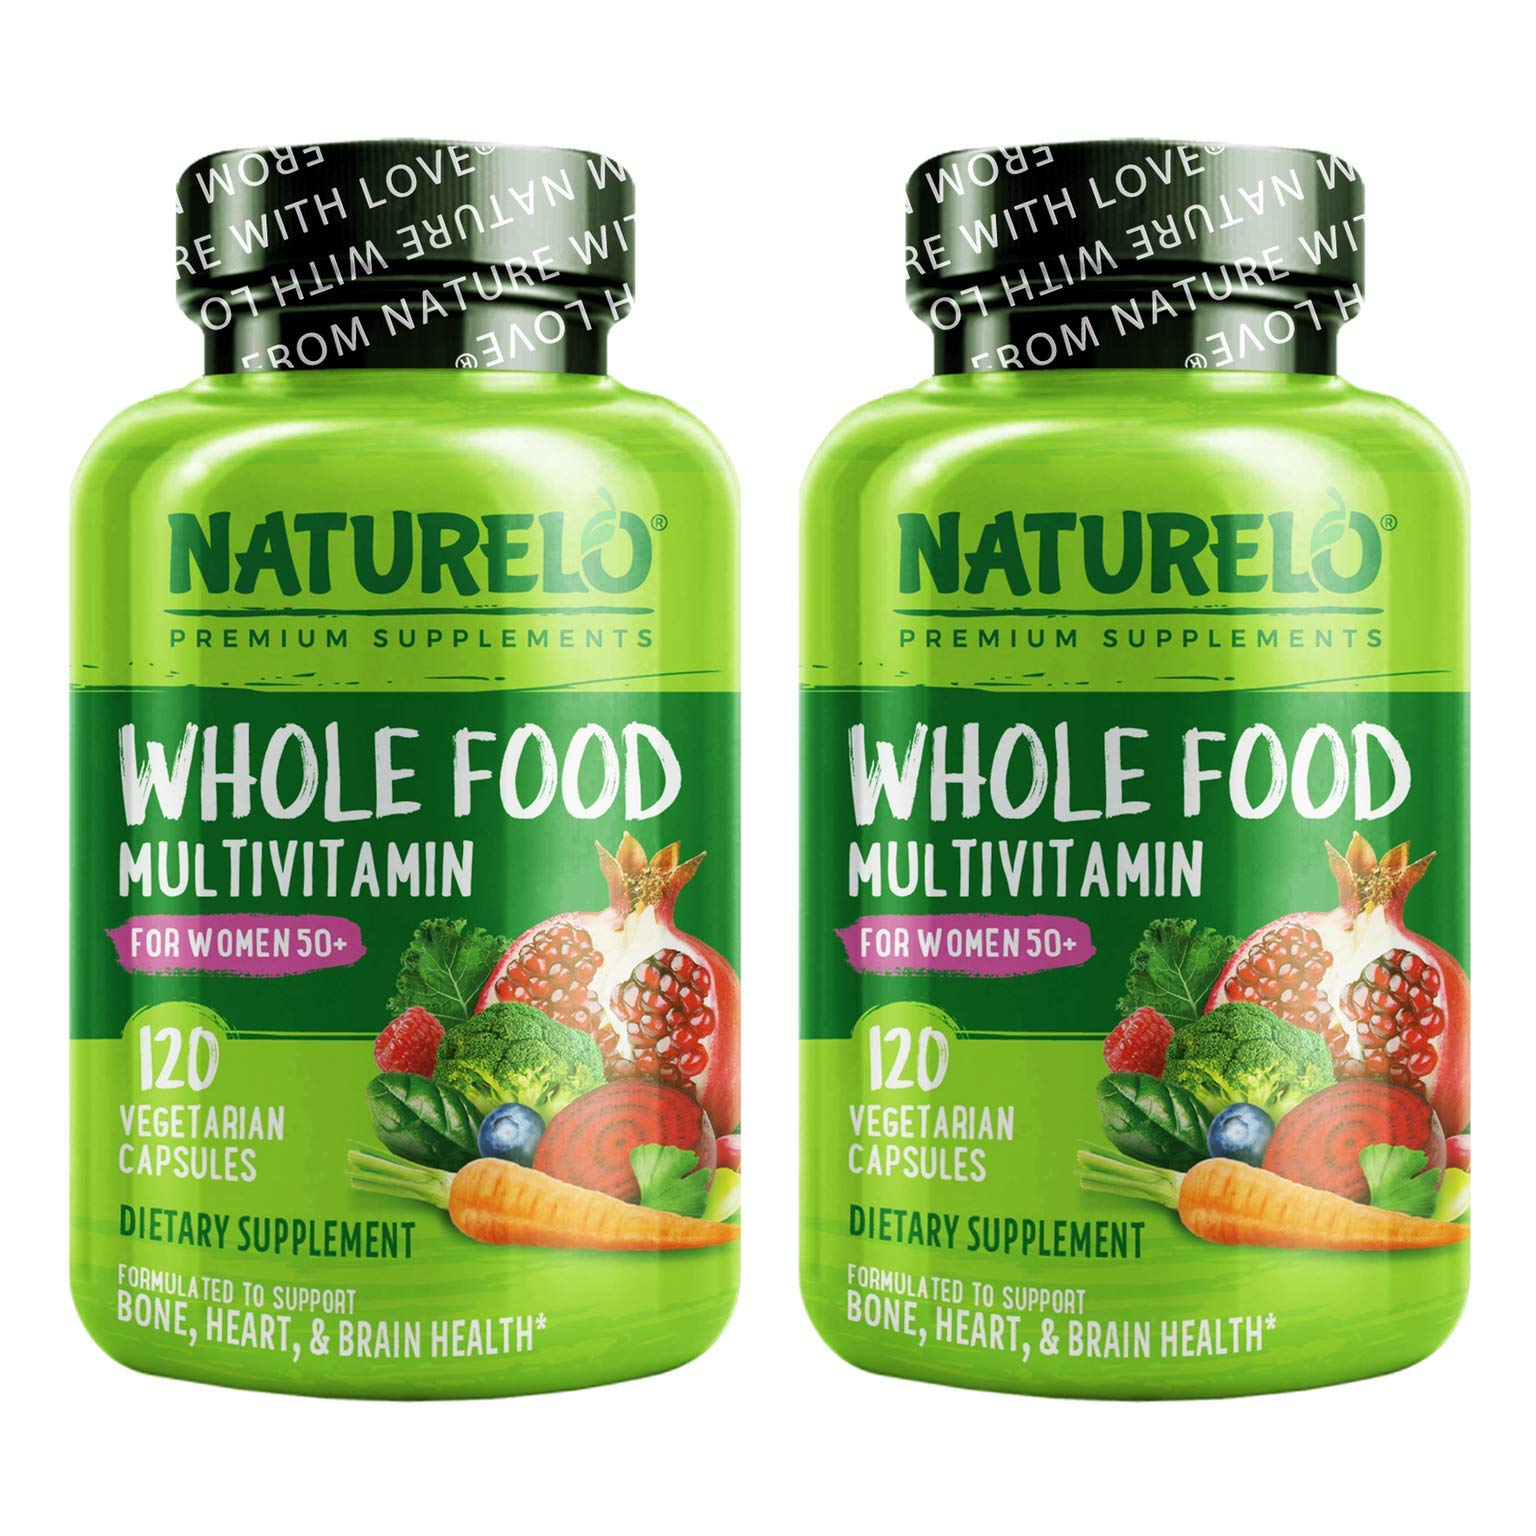 NATURELO Whole Food Multivitamin for Women 50+ (Iron Free) with Vitamins, Minerals, & Organic Extracts - Supplement for Post Menopausal Women Over ...